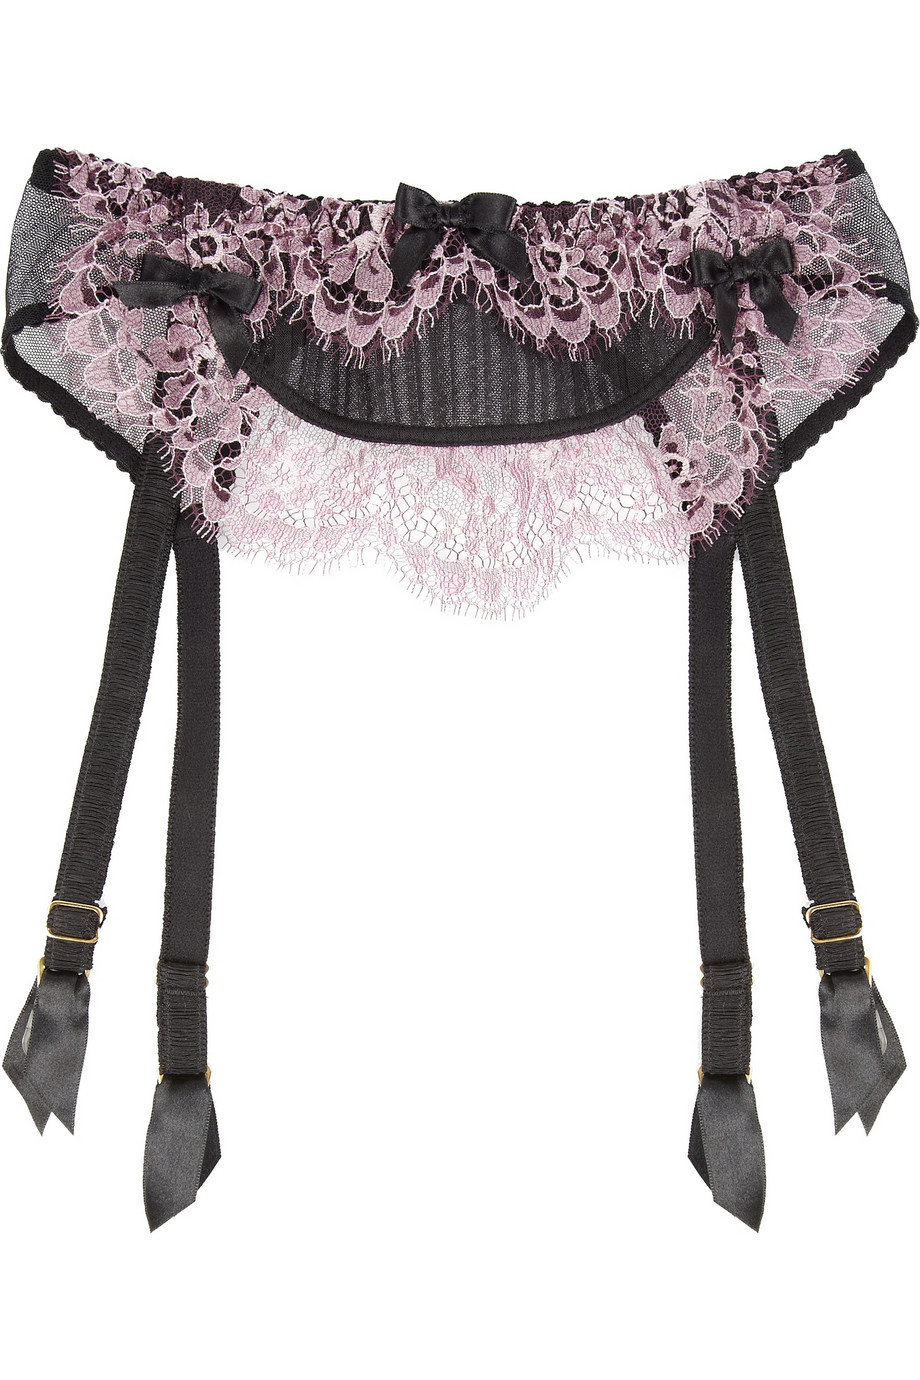 Agent provocateur Verronika Florallace and Tulle Suspender Belt in ...